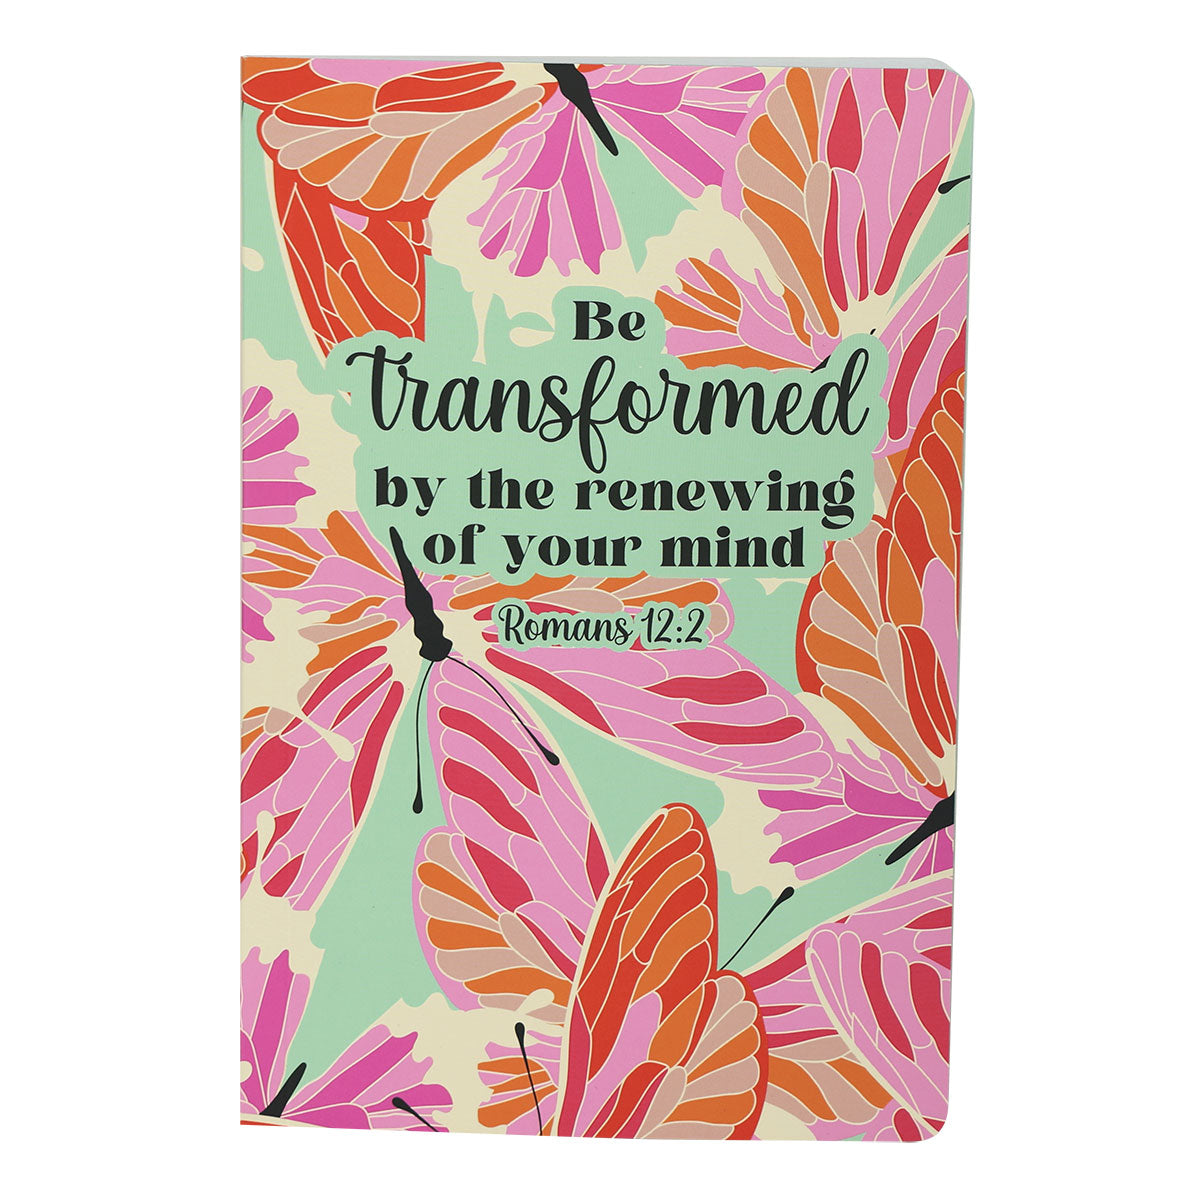 Image of Kerusso Womens Journal Be Transformed